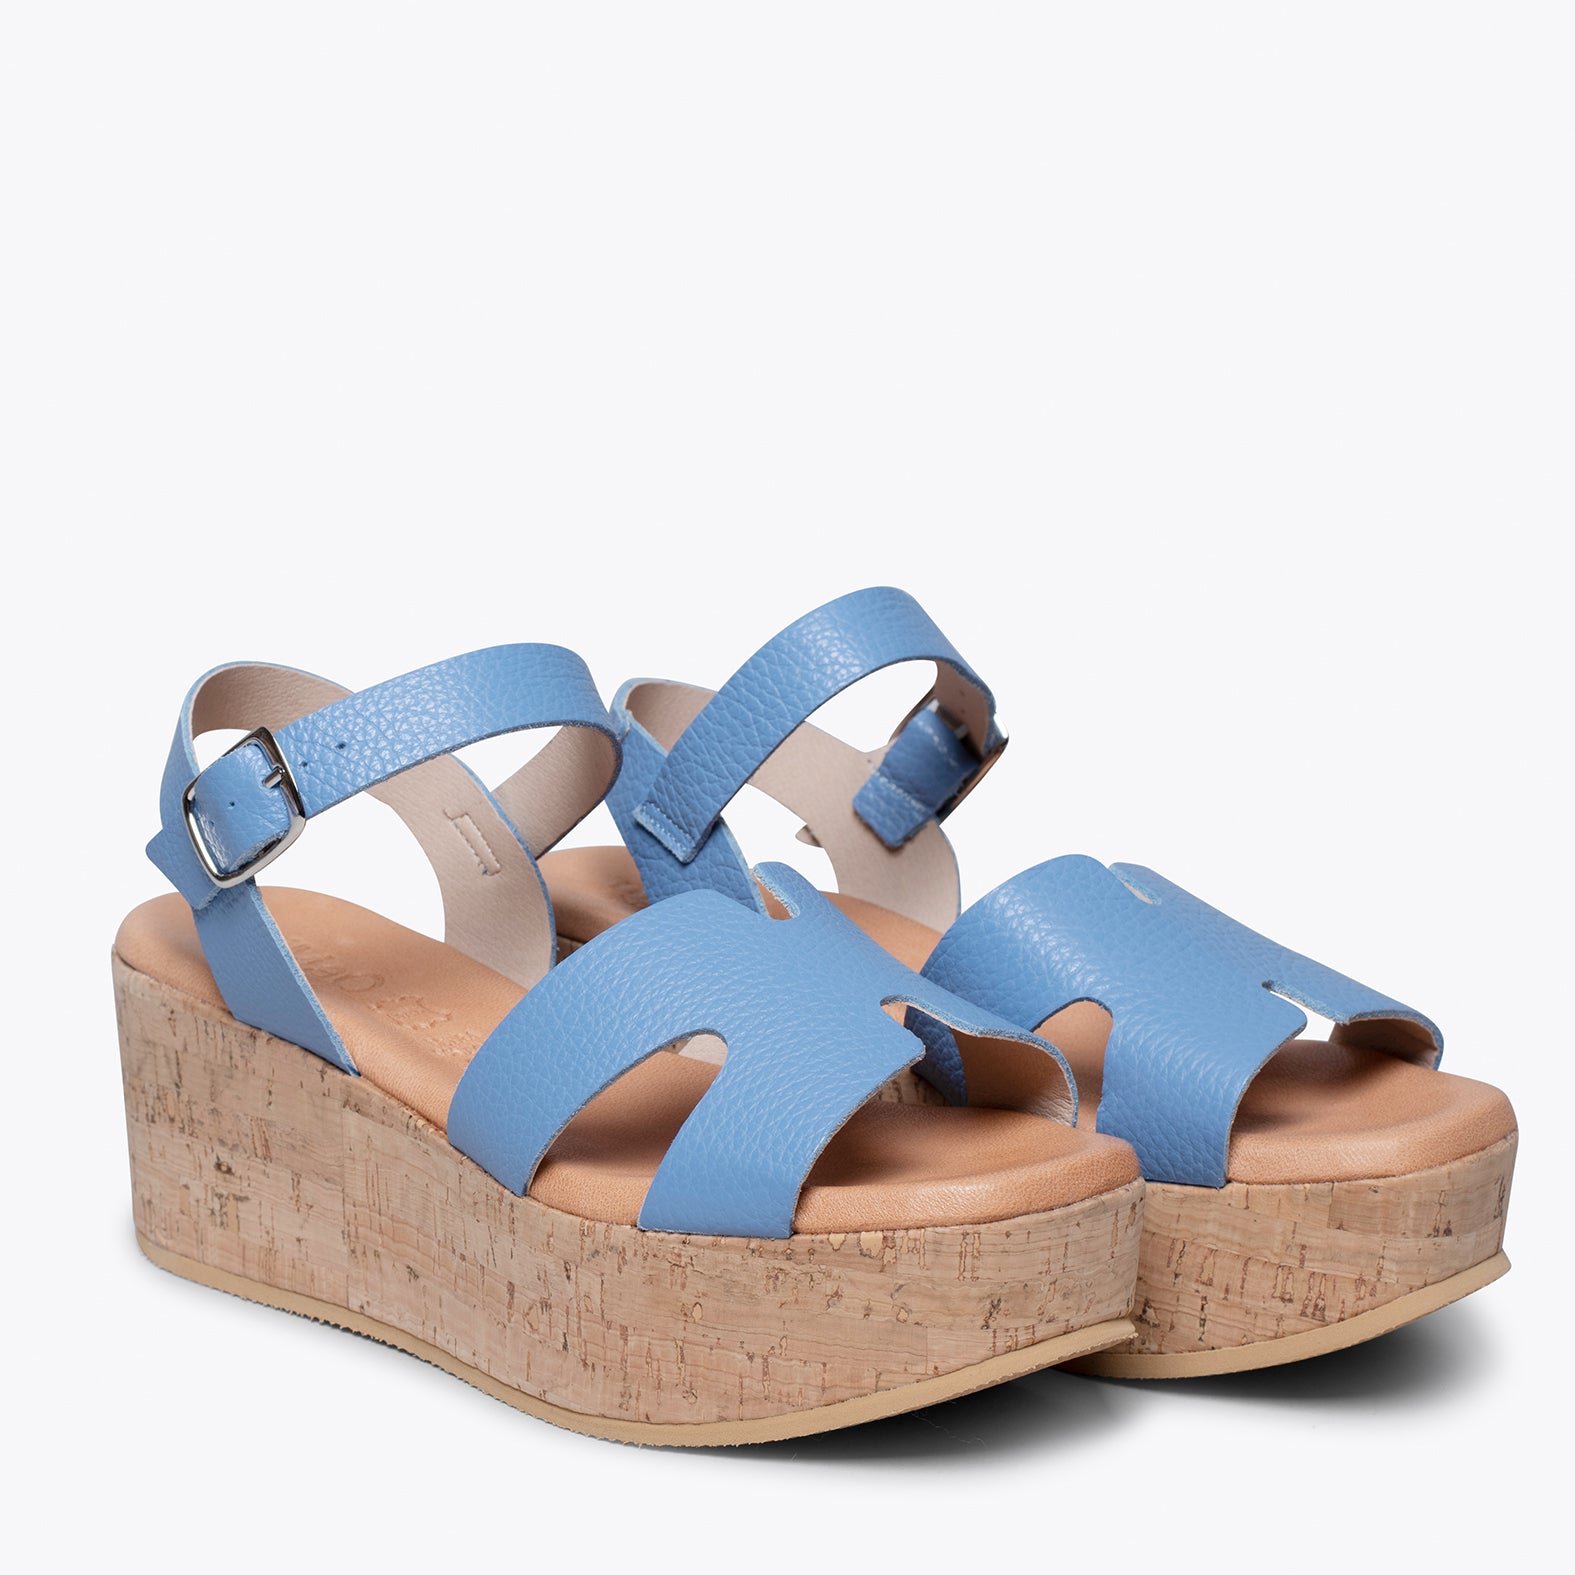 HACHE – BLUE SANDAL WITH CORK WEDGE